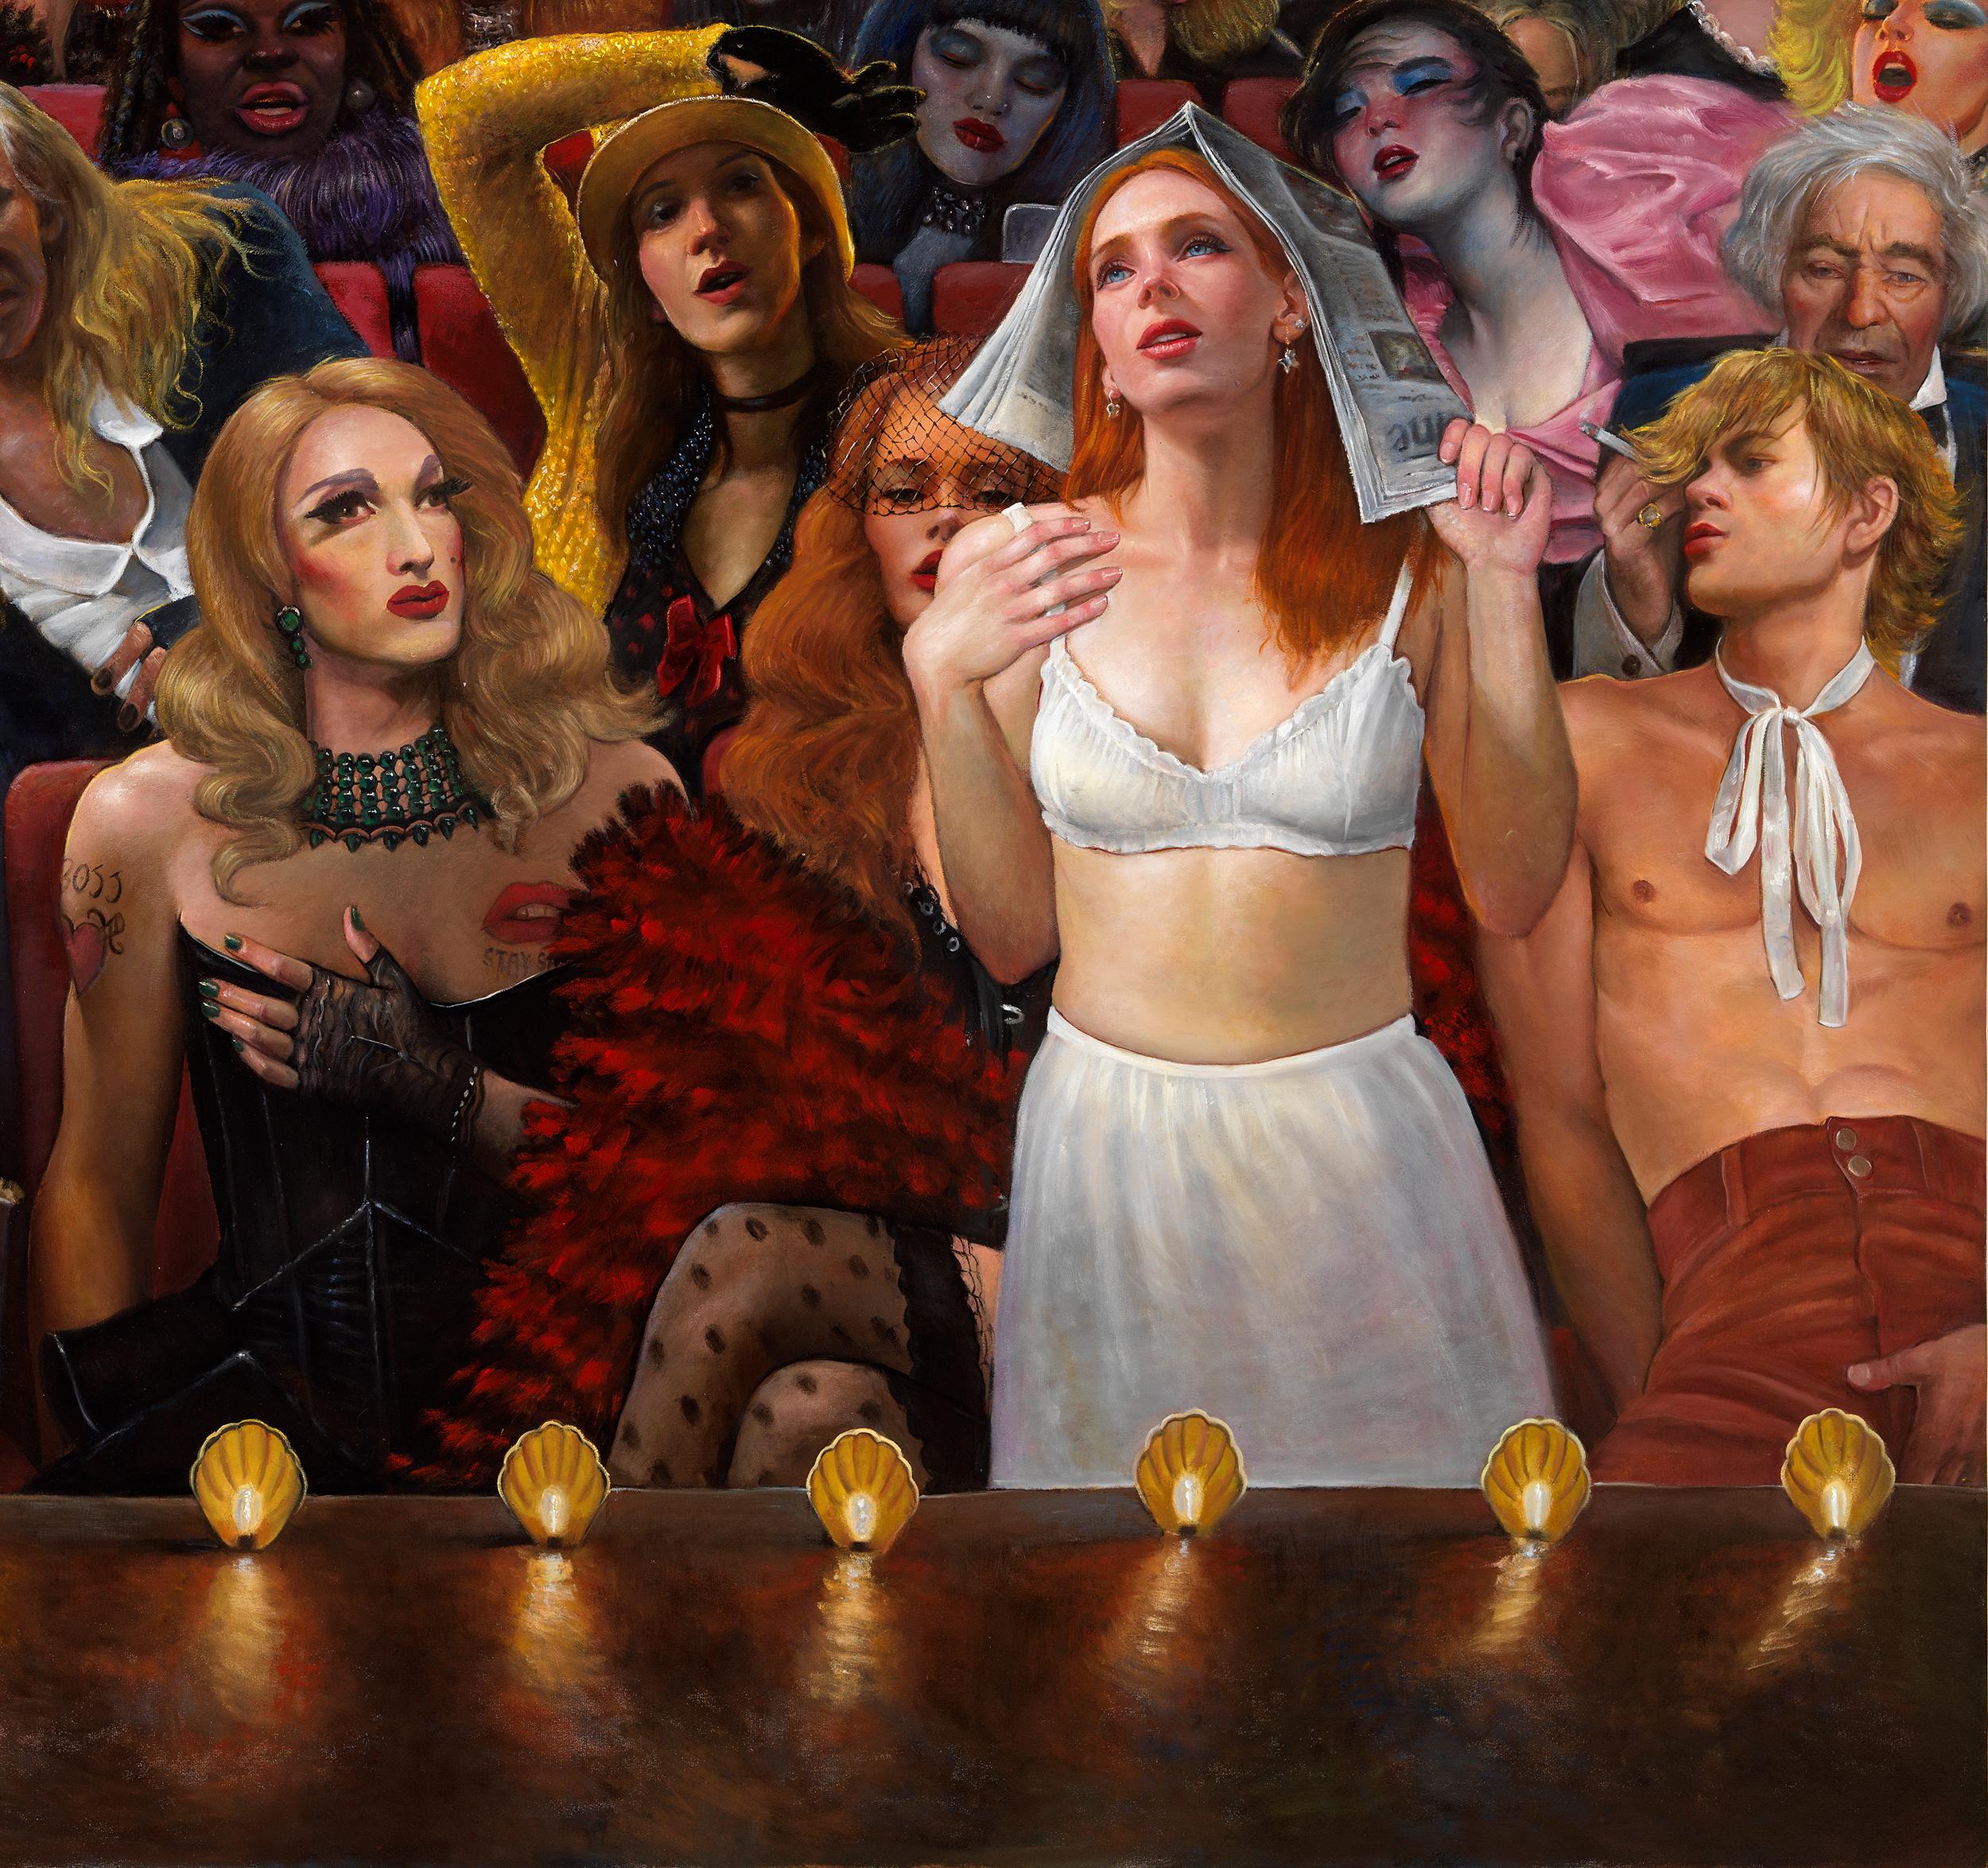 On Stage It's Okay to Be Different, un hommage au Rocky Horror Picture Show en vente 3